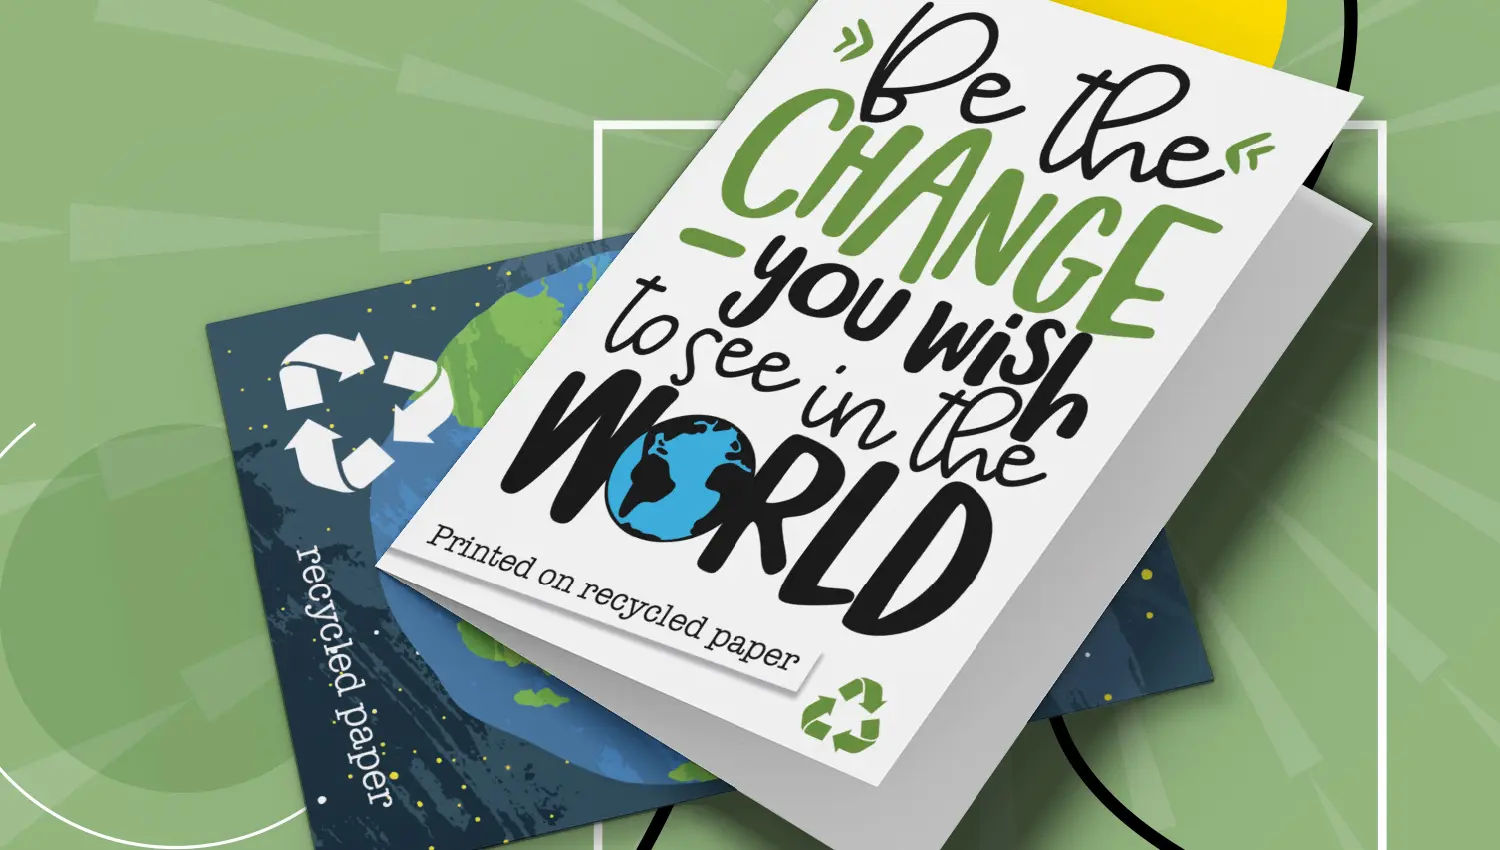 Eco friendly print – the power to make a difference